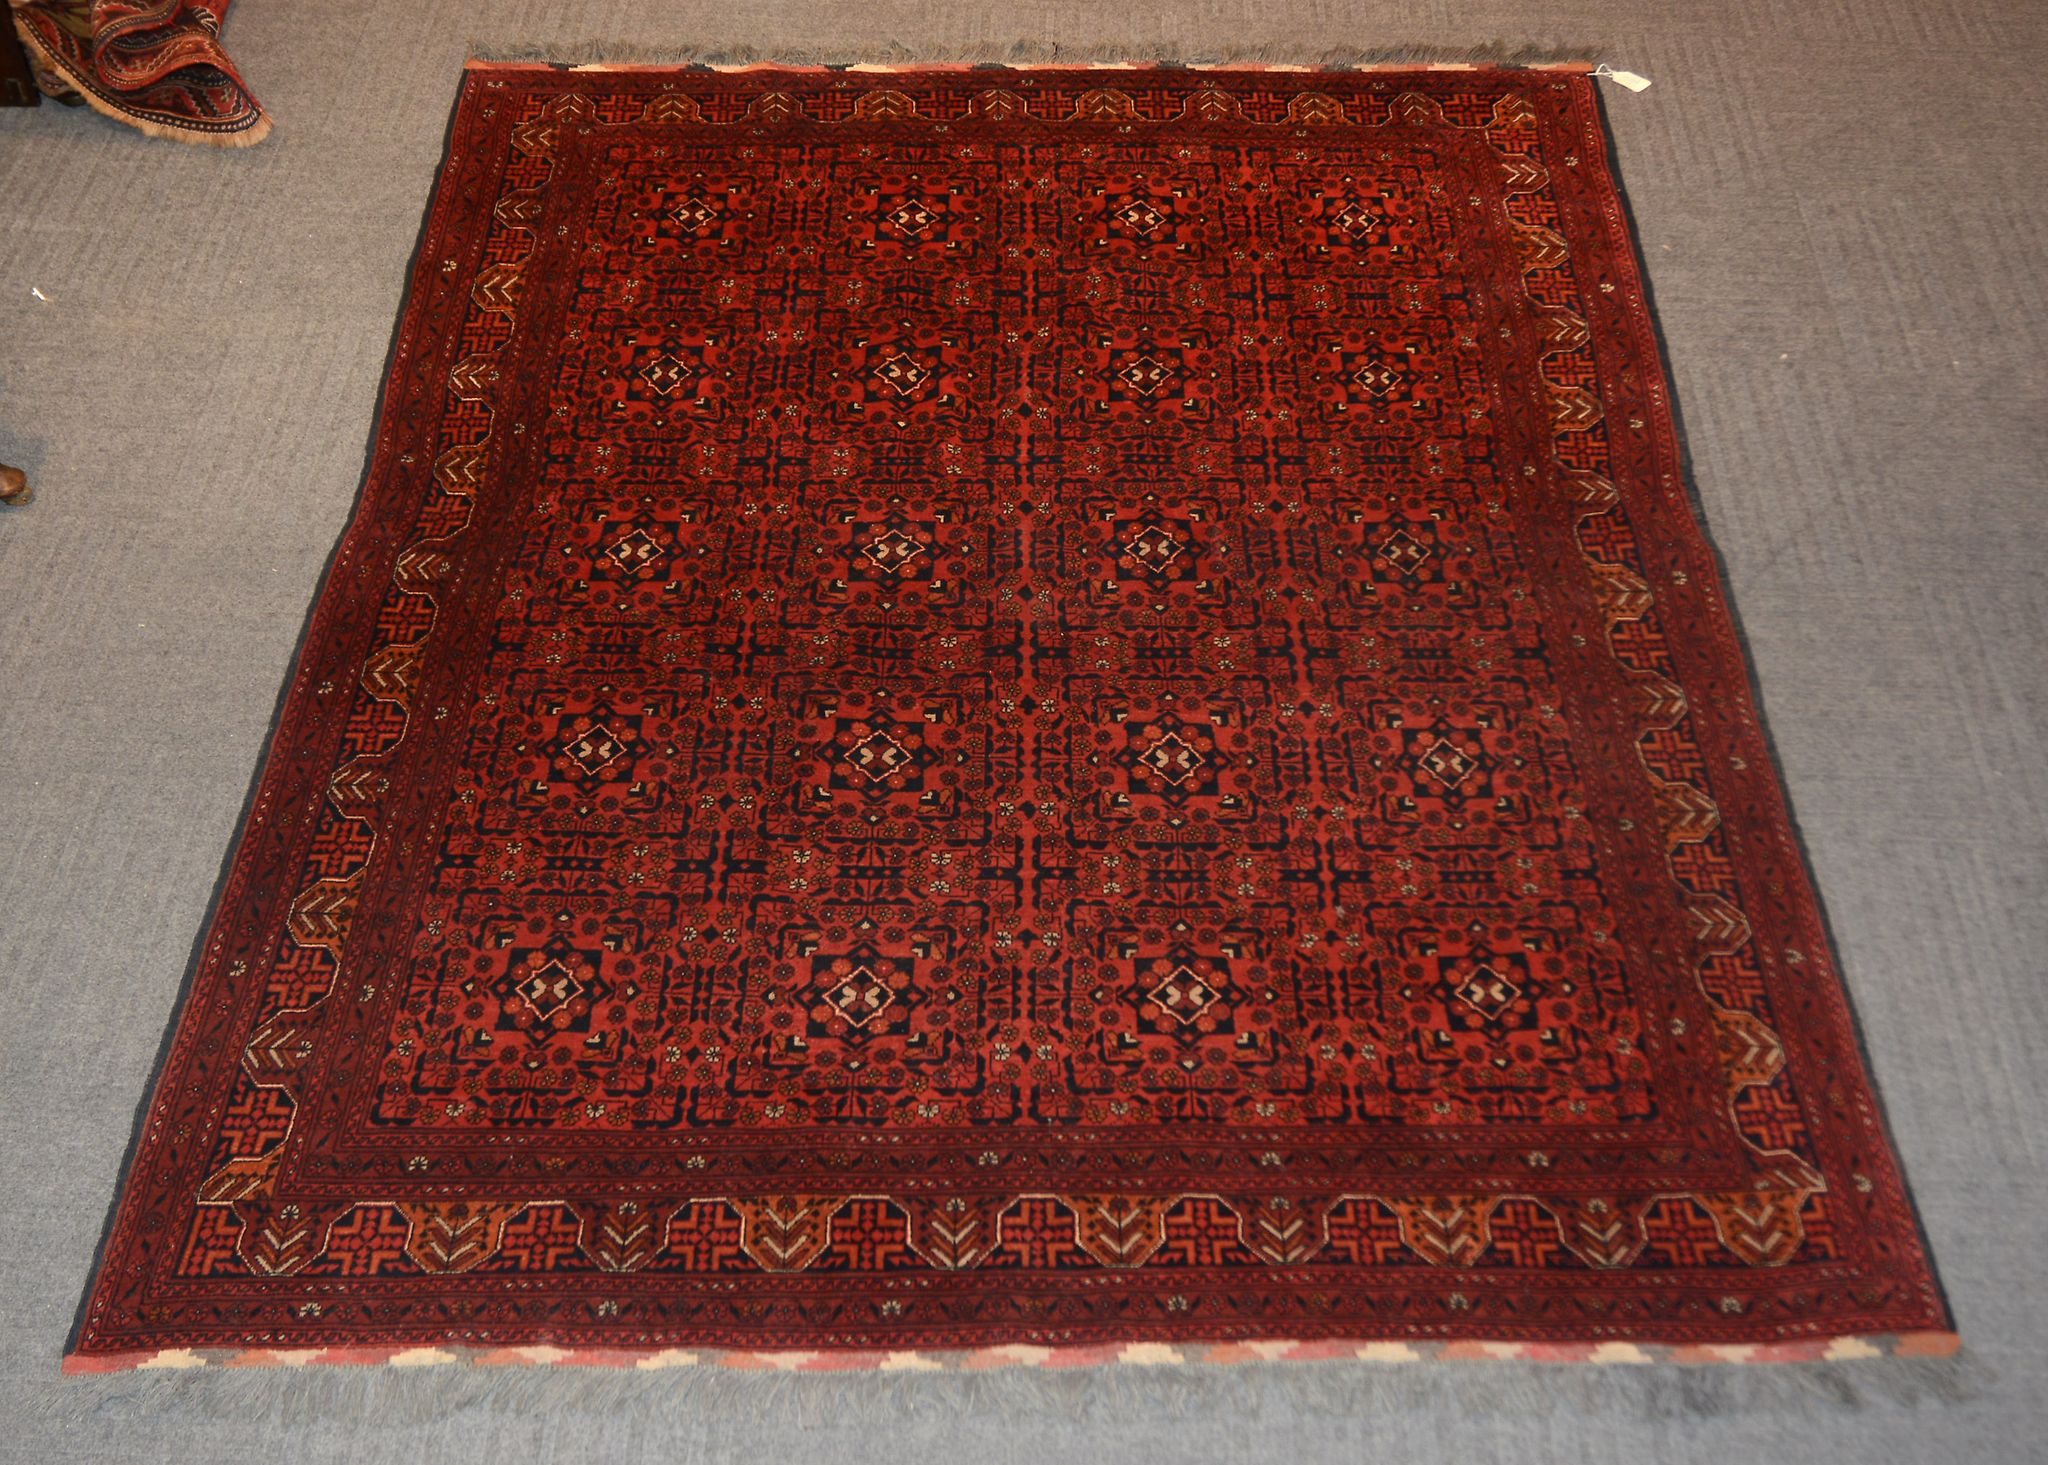 A rug in Tekke style, with a ground of stylised flowers on a red ground